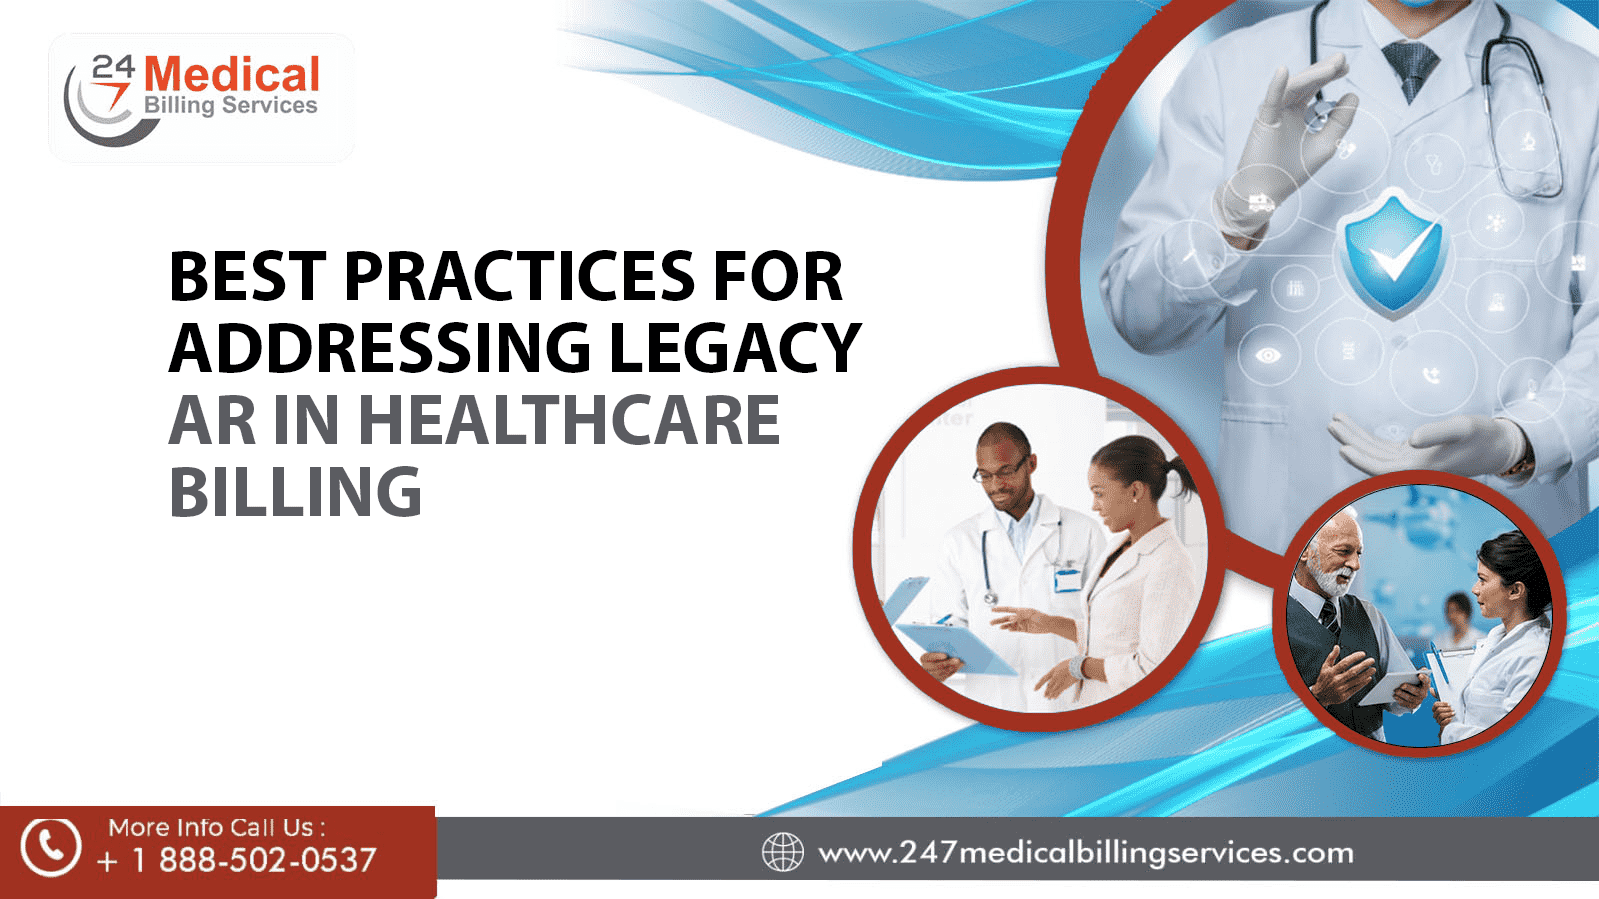  Best Practices for Addressing Legacy AR in Healthcare Billing